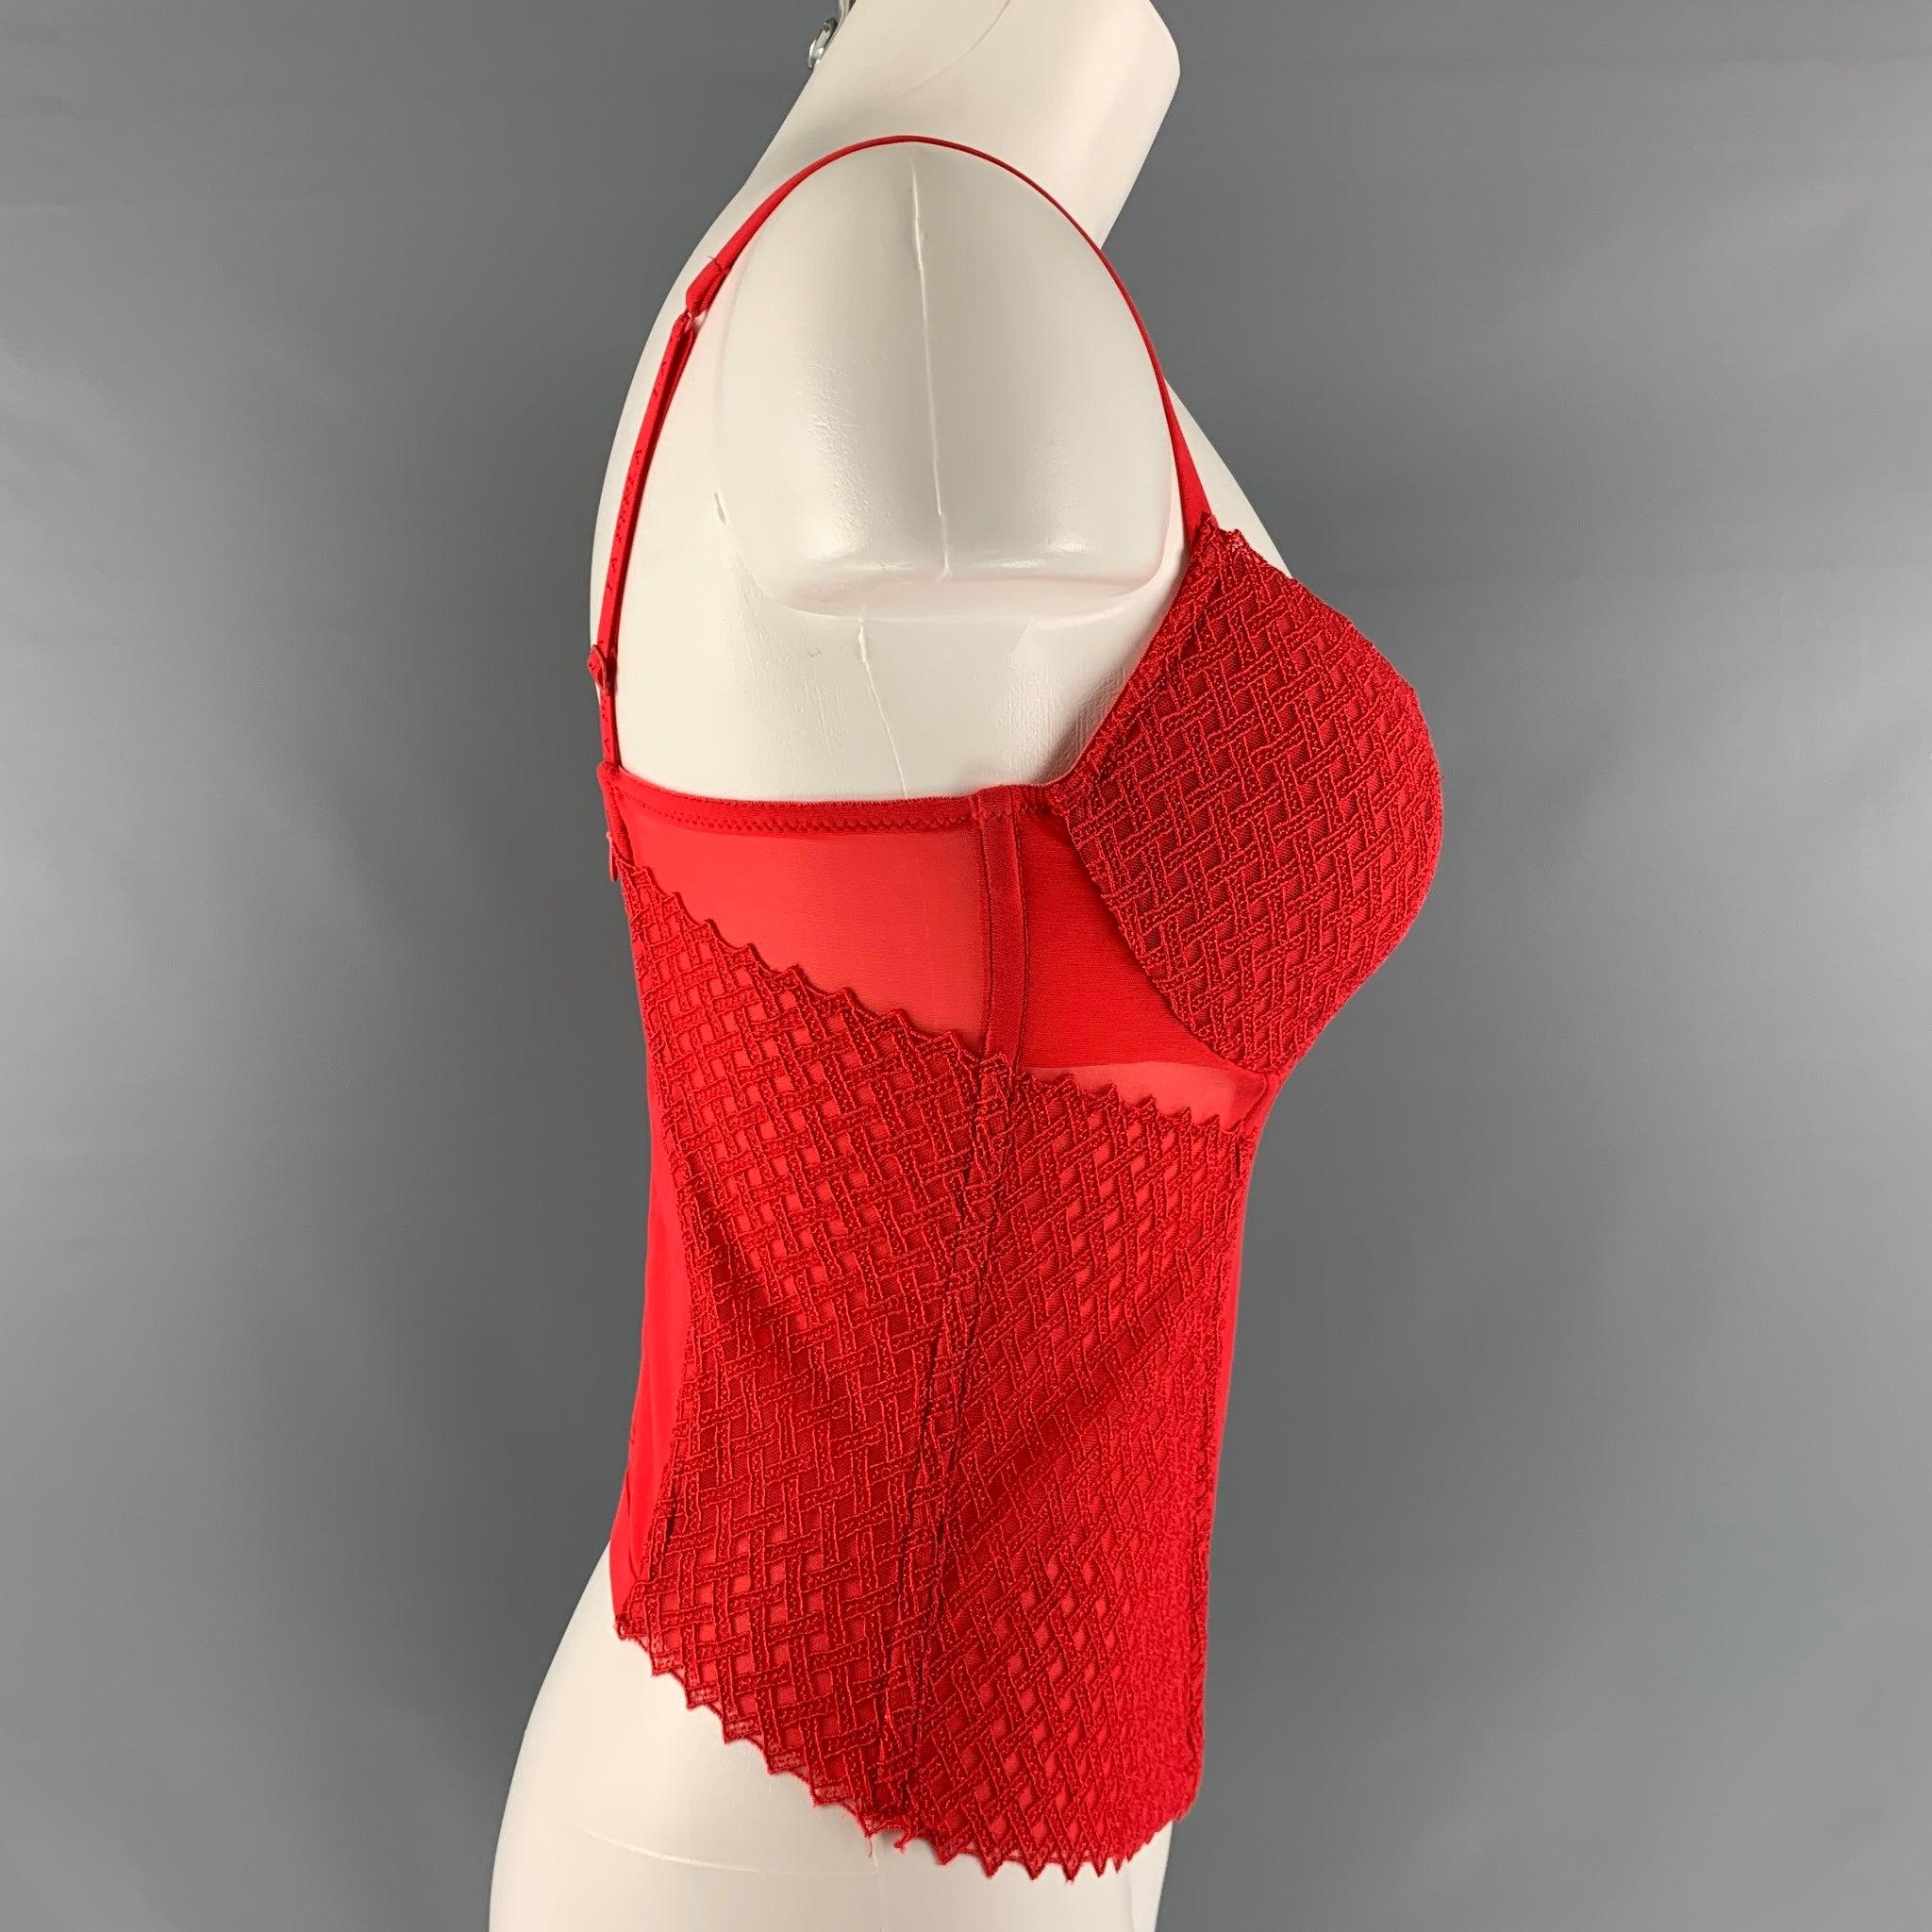 LA PERLA corset dress top comes in red polyamide knitted material featuring a mixed texture and zip up closure at center back.Excellent Pre-Owned Condition. 

Marked:  3 IT 

Measurements: 
 Bust: 28 inches Length: 13 inches 
 
 
 
 
Reference: